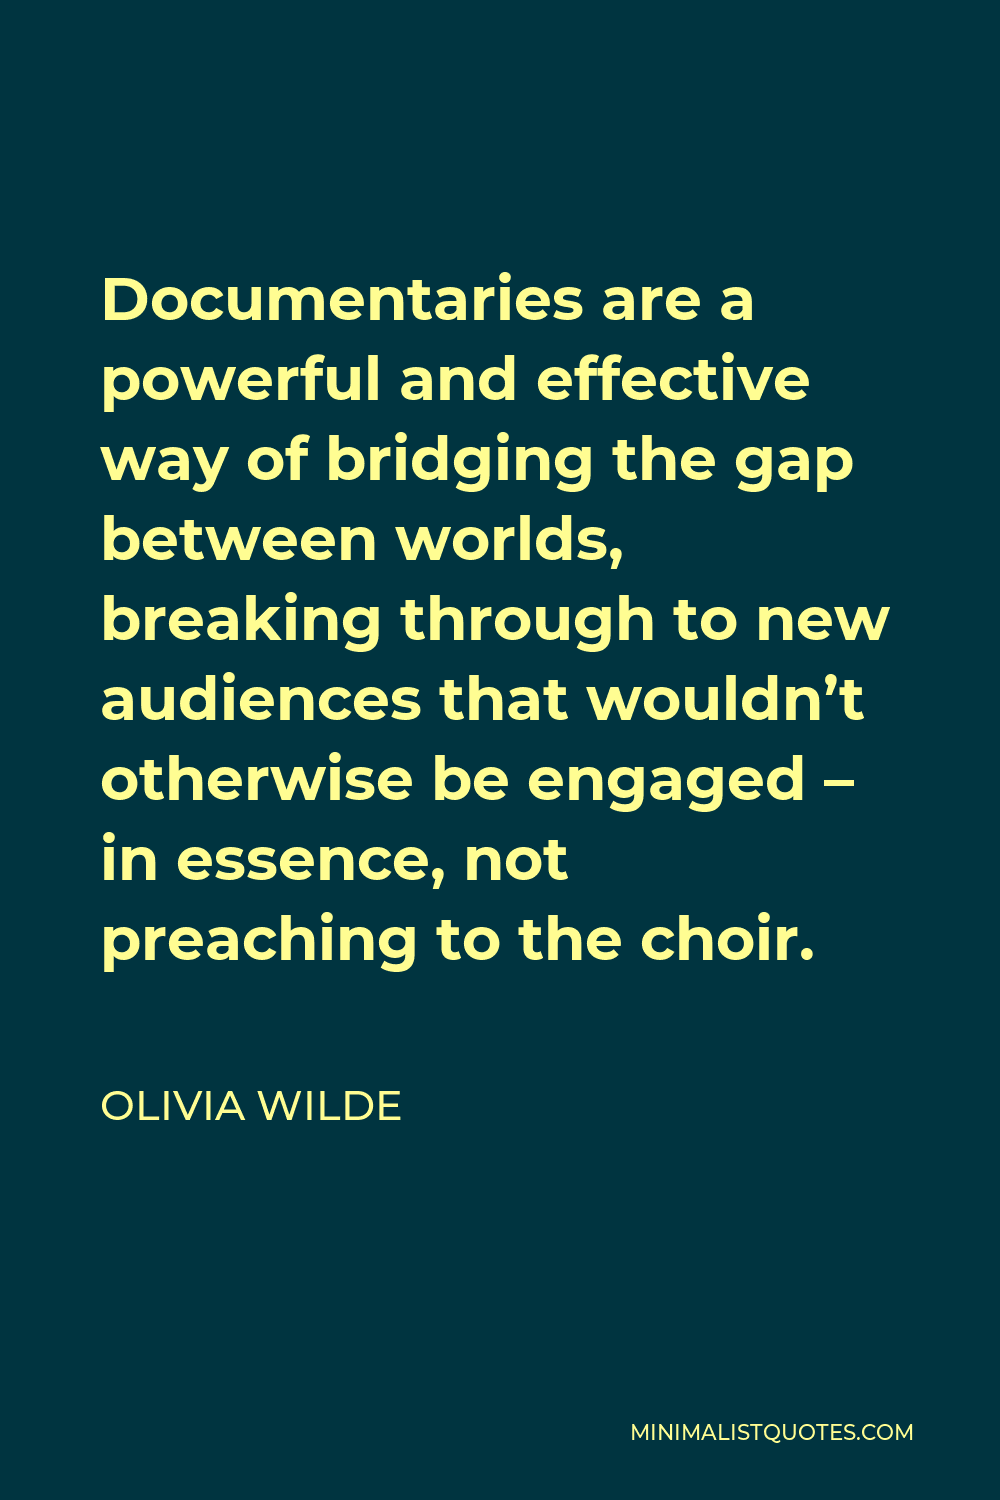 Olivia Wilde Quote - Documentaries are a powerful and effective way of bridging the gap between worlds, breaking through to new audiences that wouldn’t otherwise be engaged – in essence, not preaching to the choir.